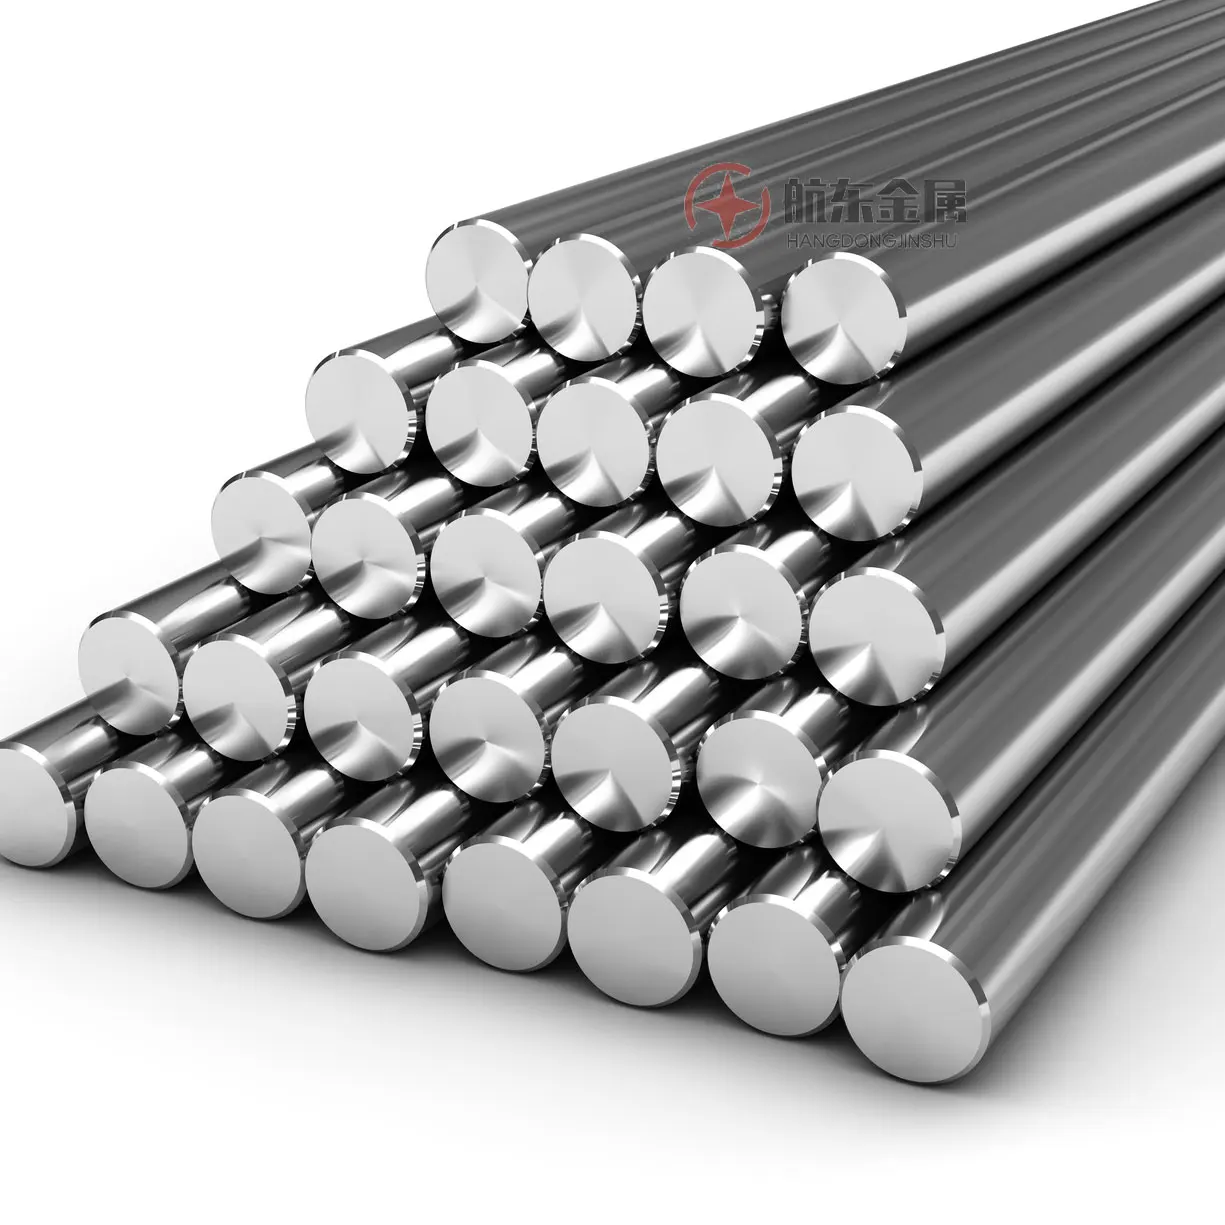 hot sale factory best  price 201 304 430 316L  stainless steel round bar 4mm,8mm,10mm or as customized size (1600331394412)